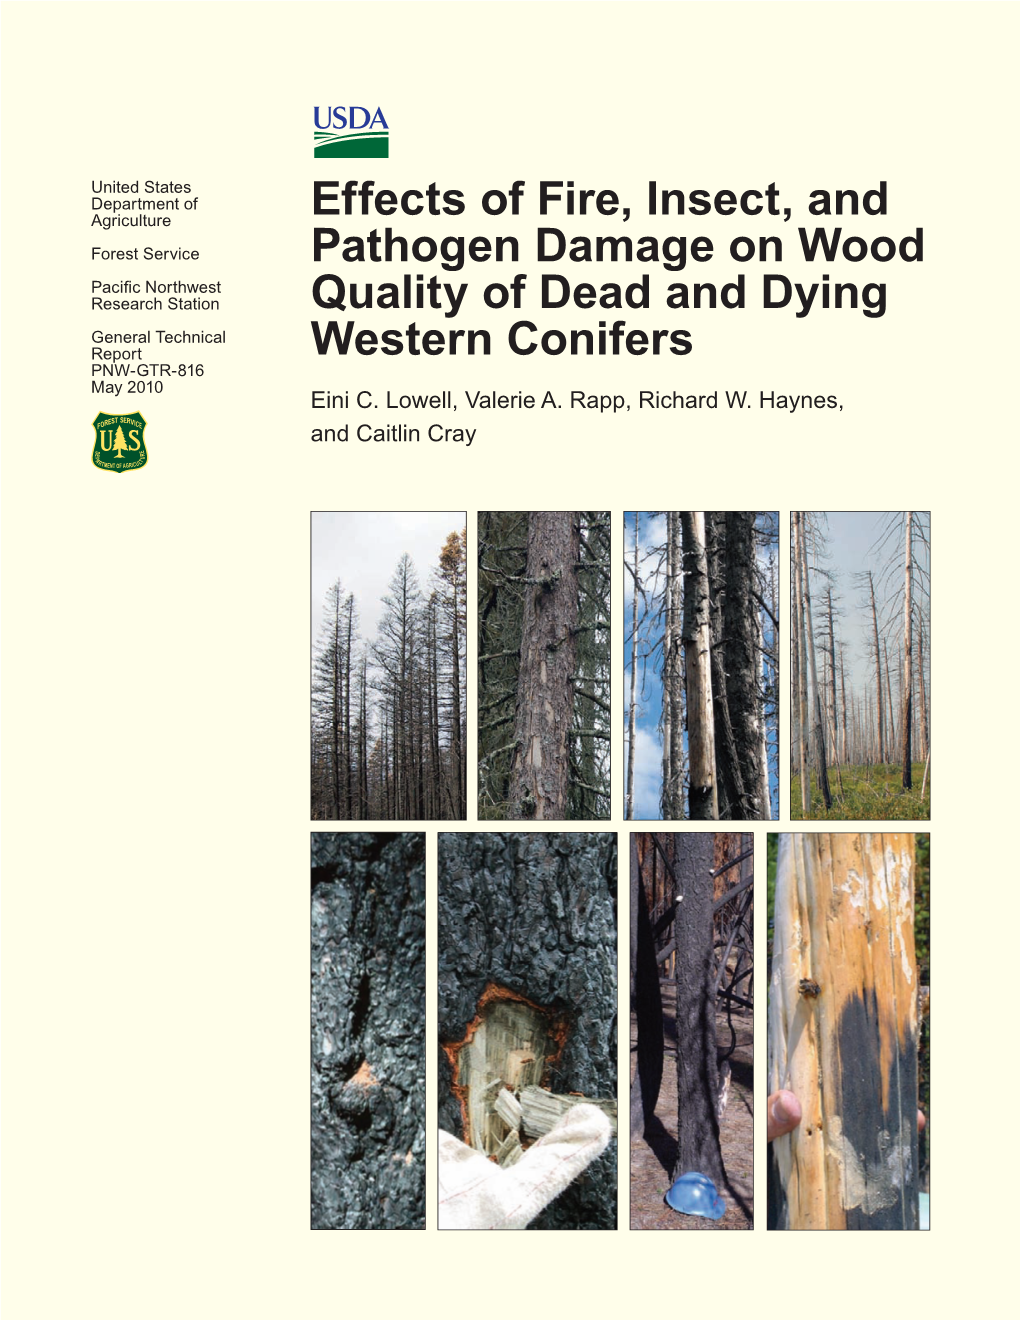 Effects of Fire, Insect, and Pathogen Damage on Wood Quality of Dead and Dying Western Conifers